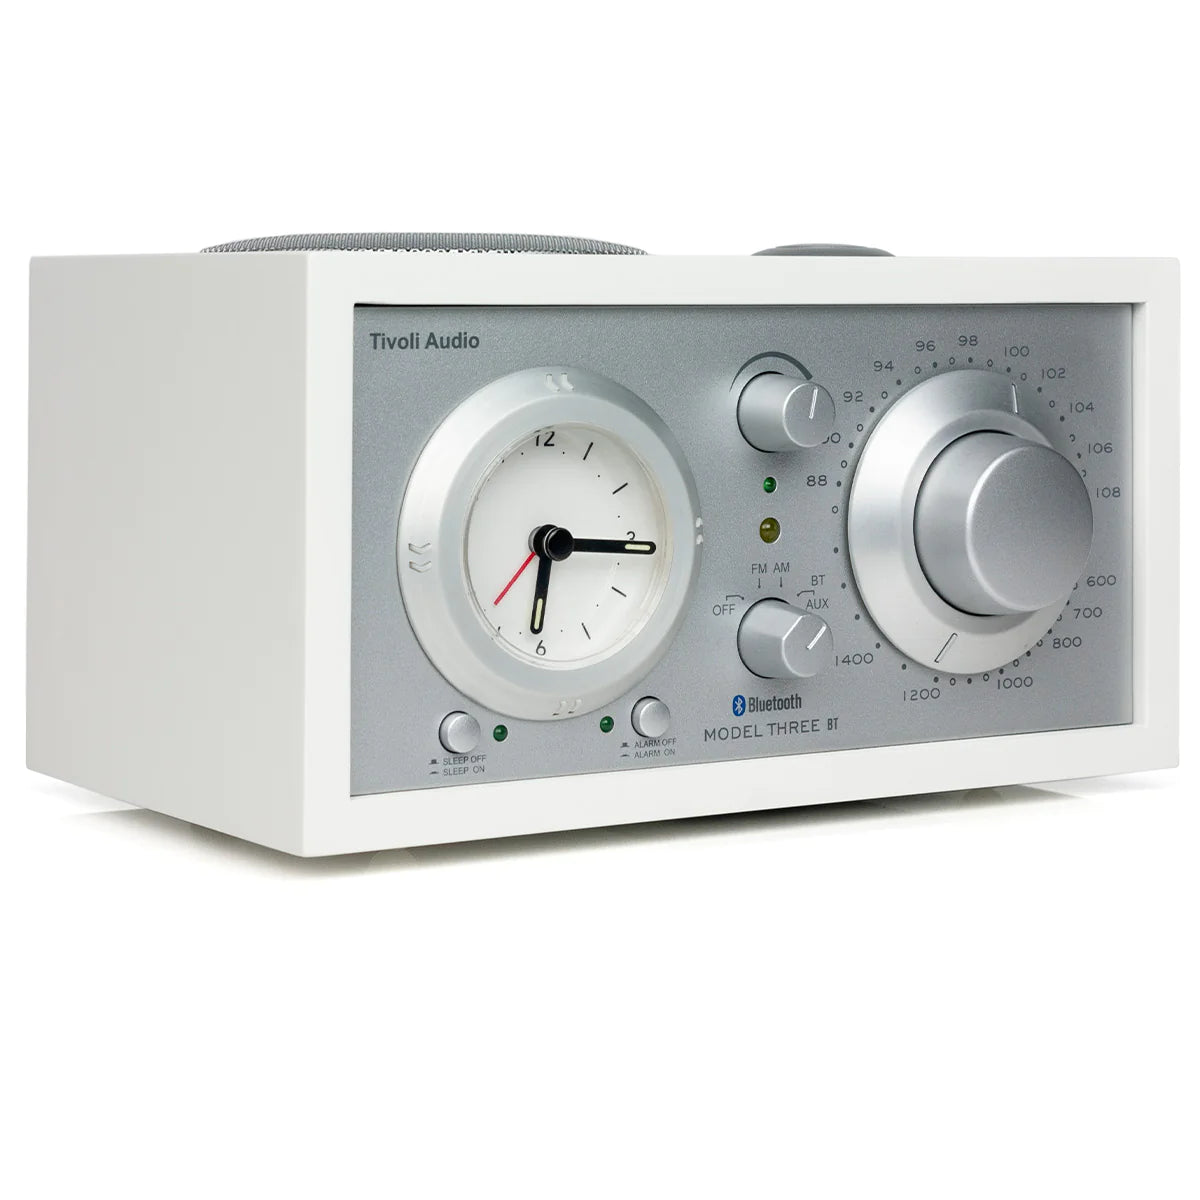 The Tivoli Audio Model Three BT blends classic design, superior sound and Bluetooth connectivity. Side White Silver image